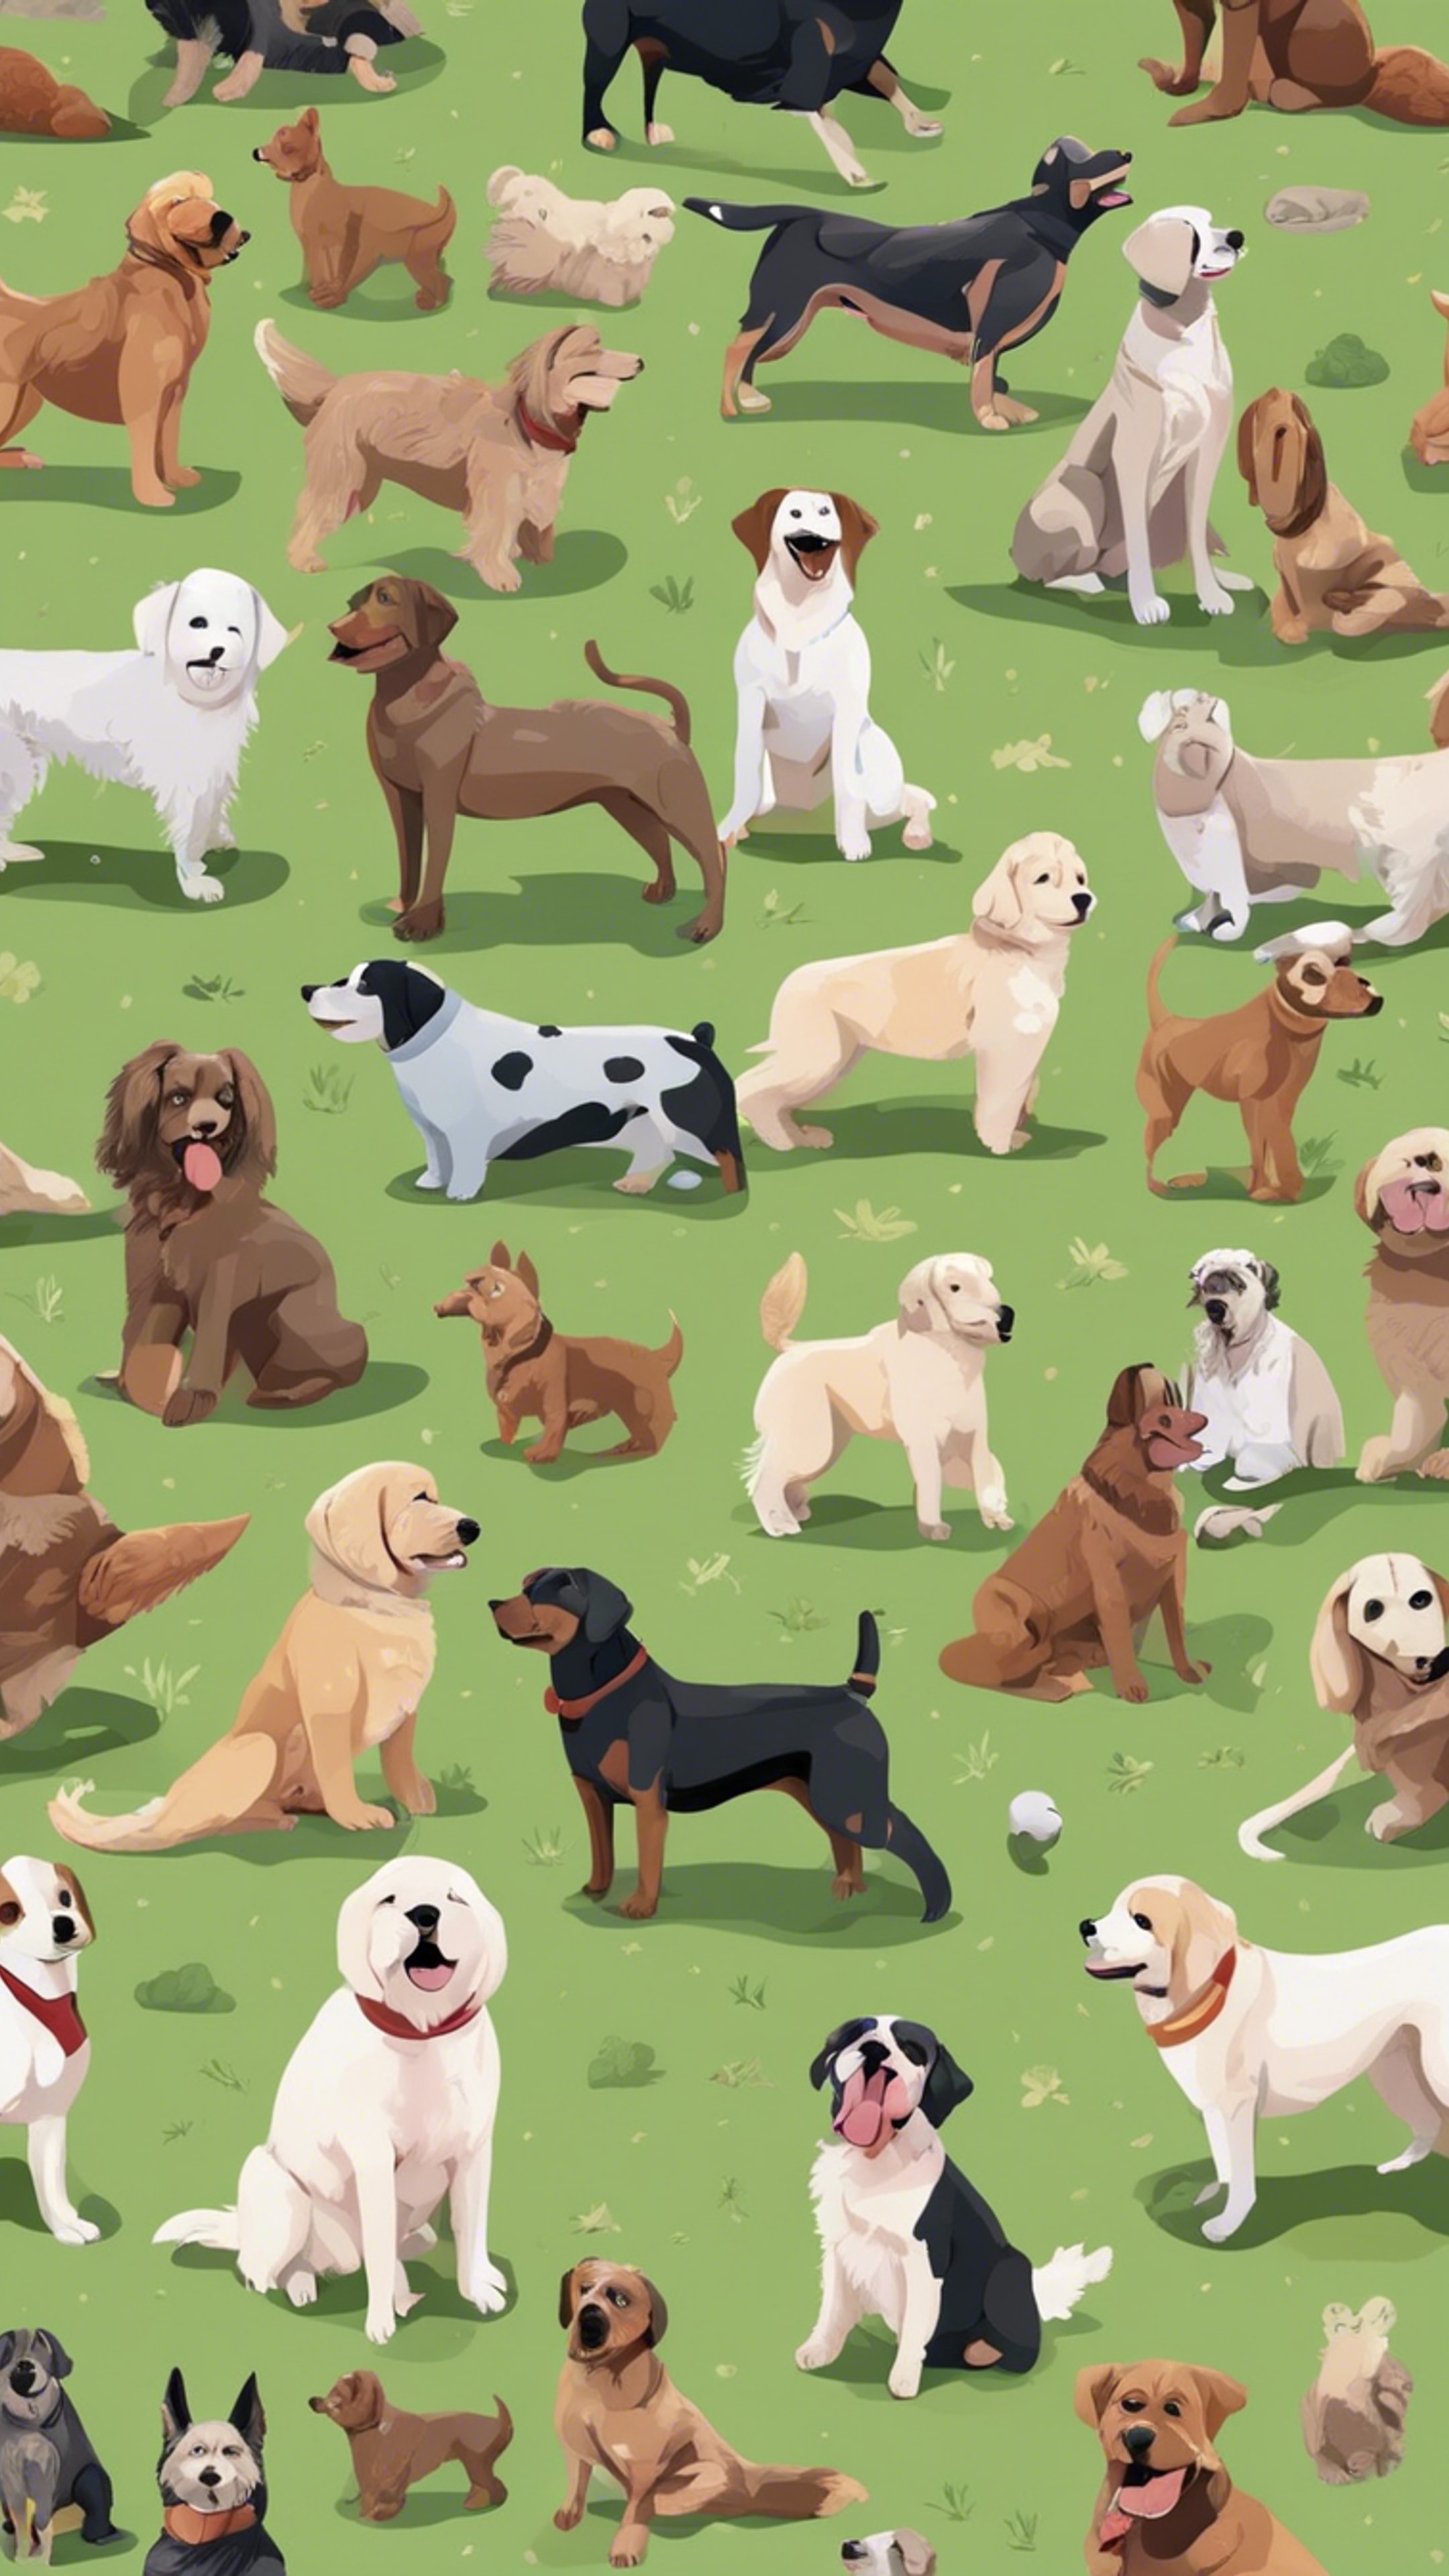 Seamless pattern of various breed of dogs playing in a park. Wallpaper[140058c252ce4edb8a7a]